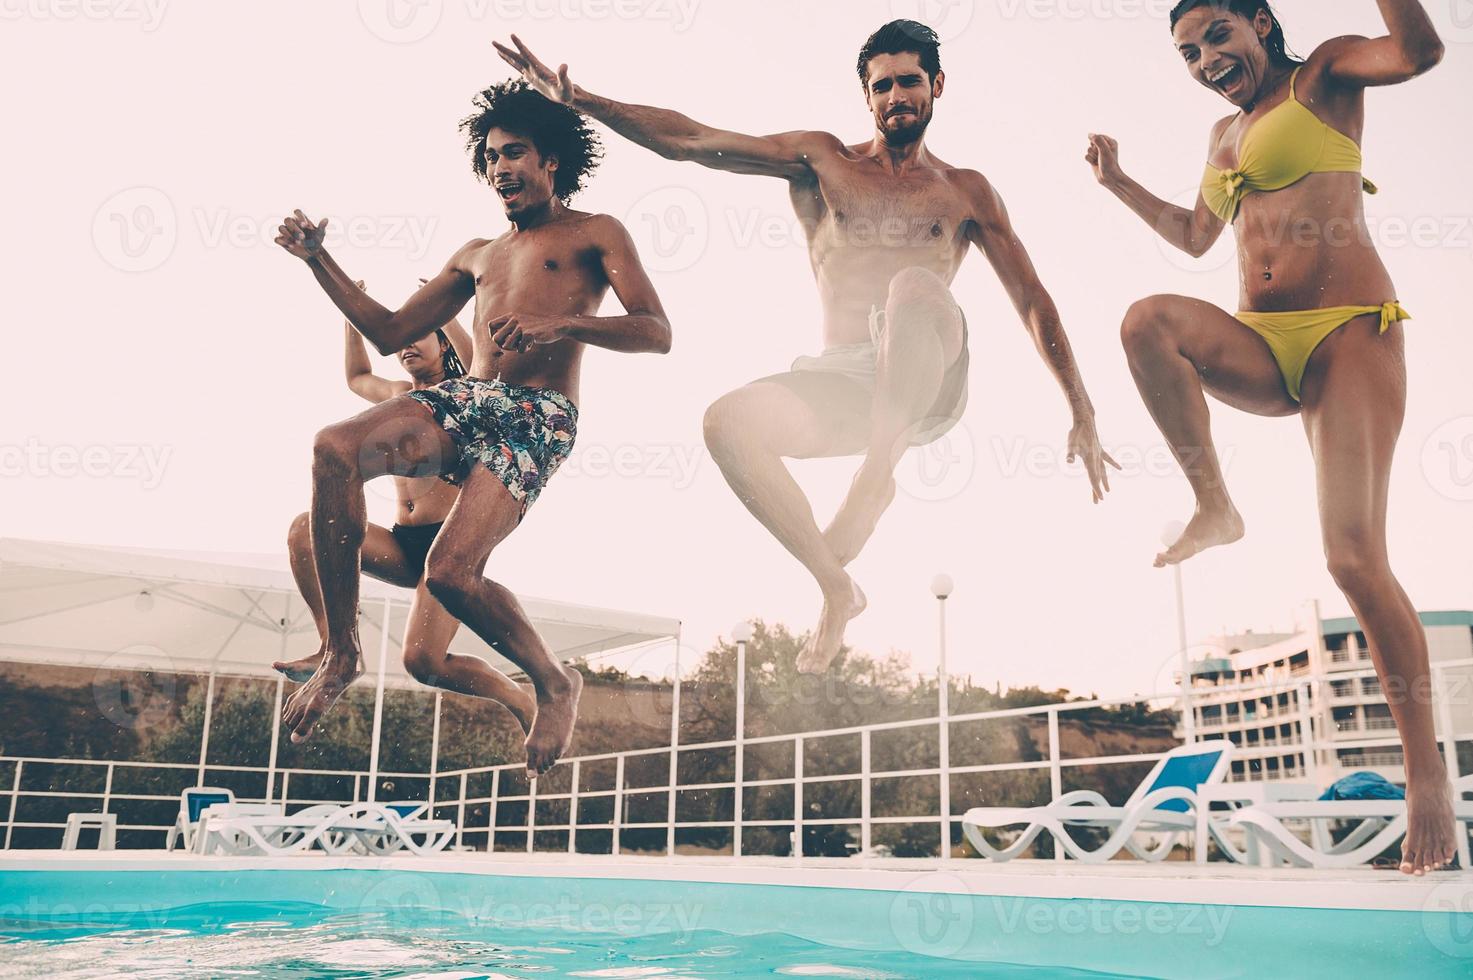 Jumping to the pool. Group of beautiful young people looking happy while jumping into the swimming pool together photo